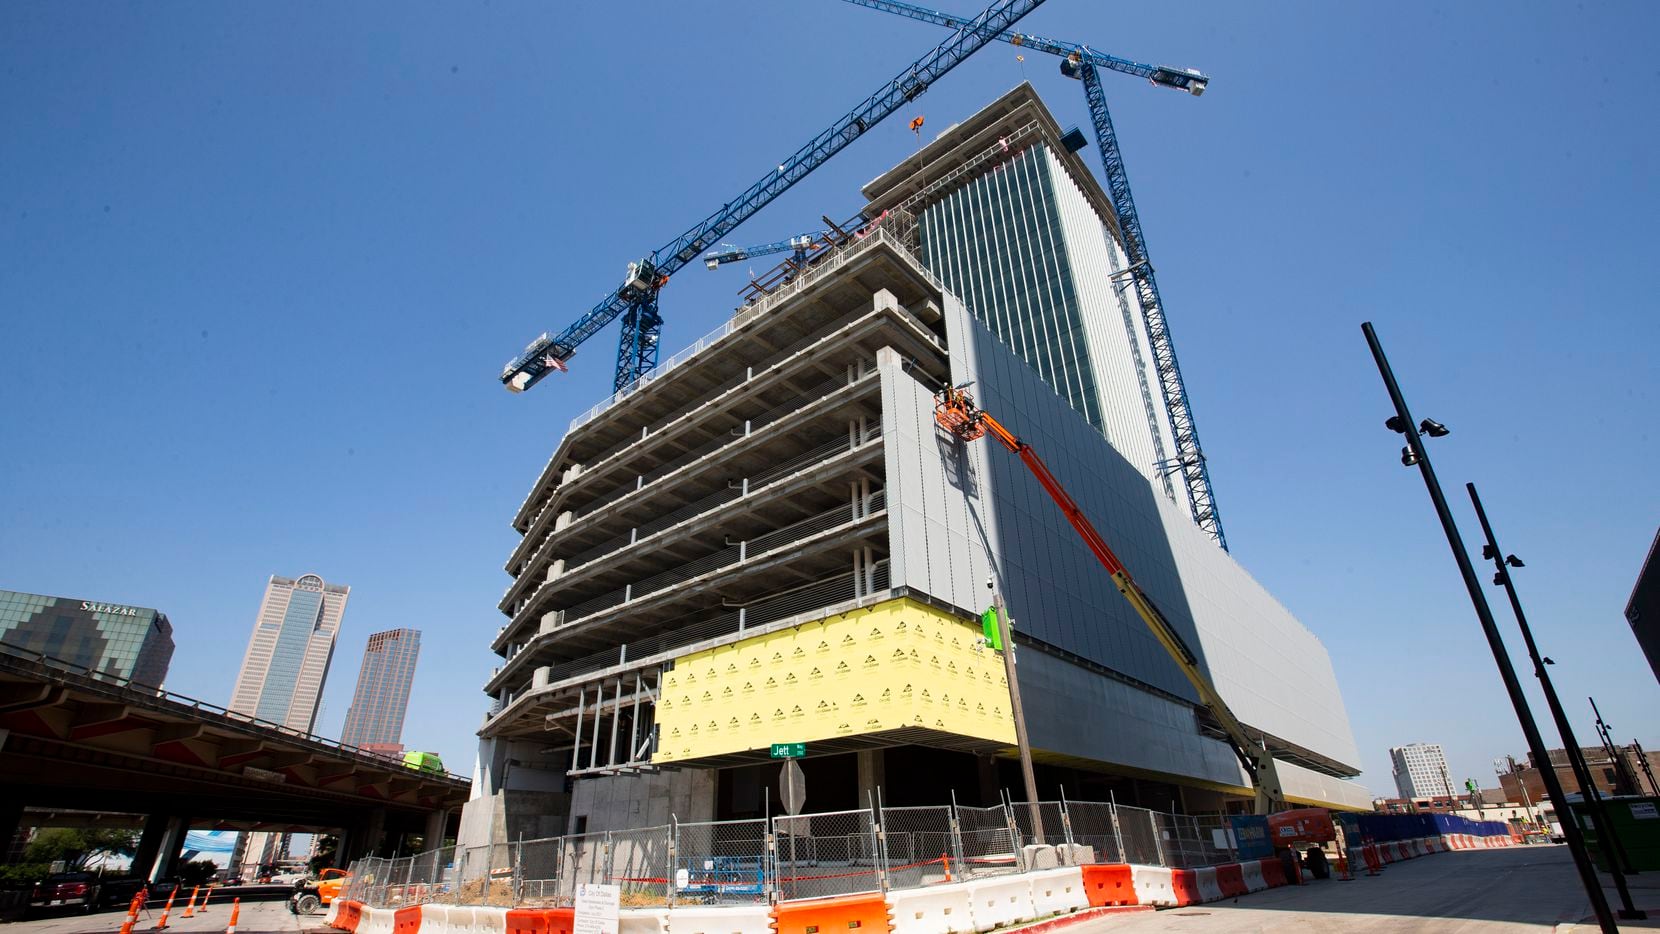 Uber has rented more than 600,000 square feet of office space in the Epic development in...